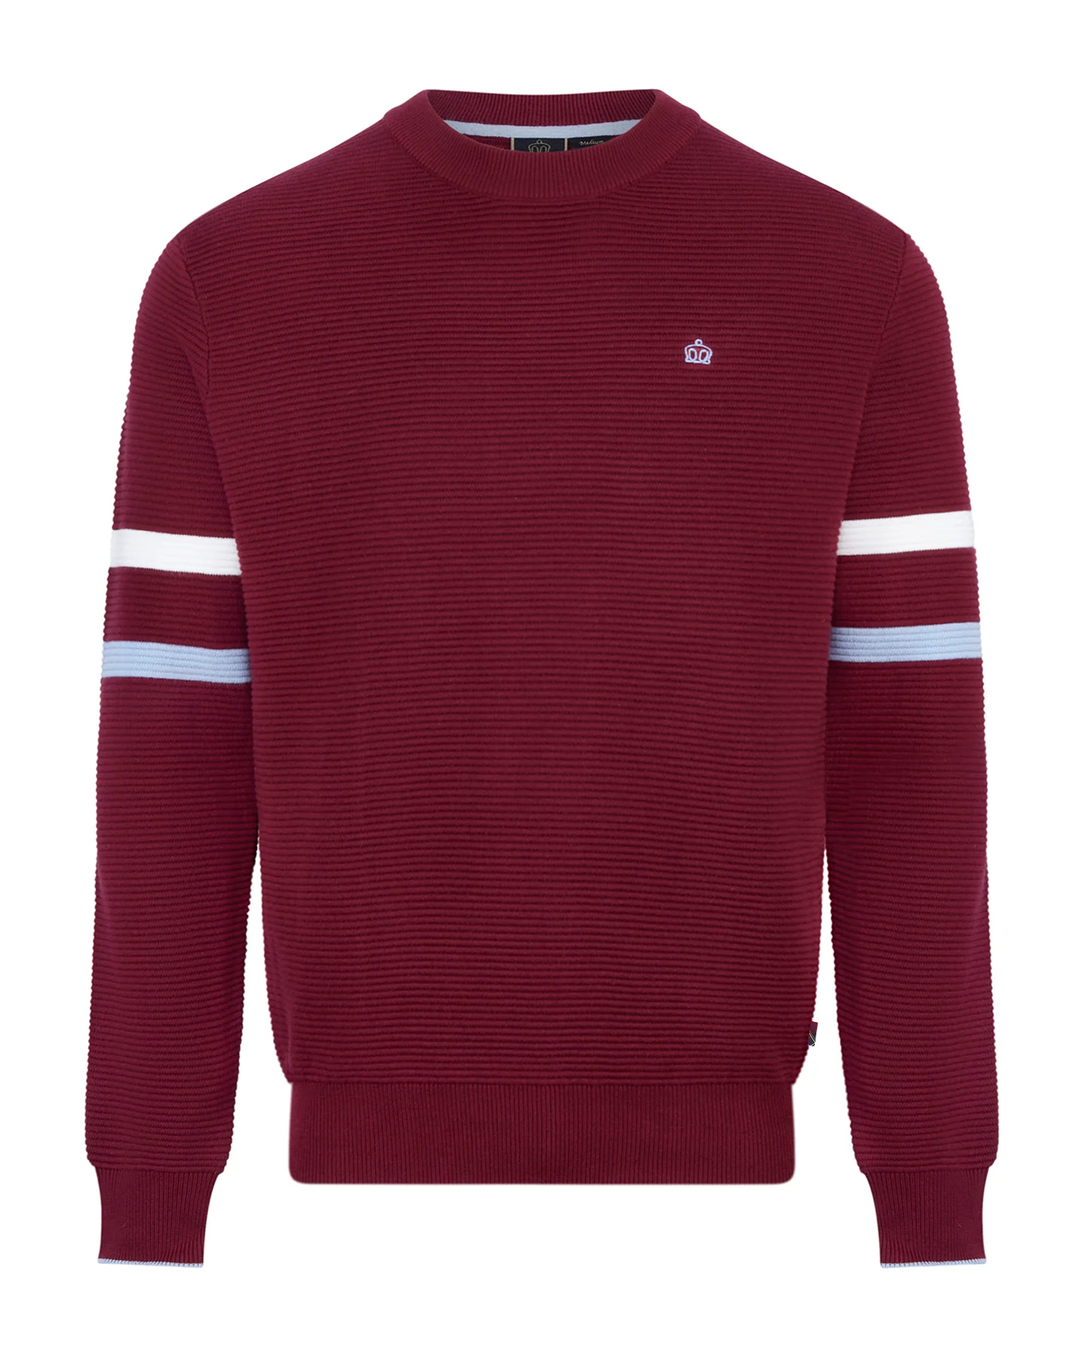 Merc London Medway Knitted Jumper Wine